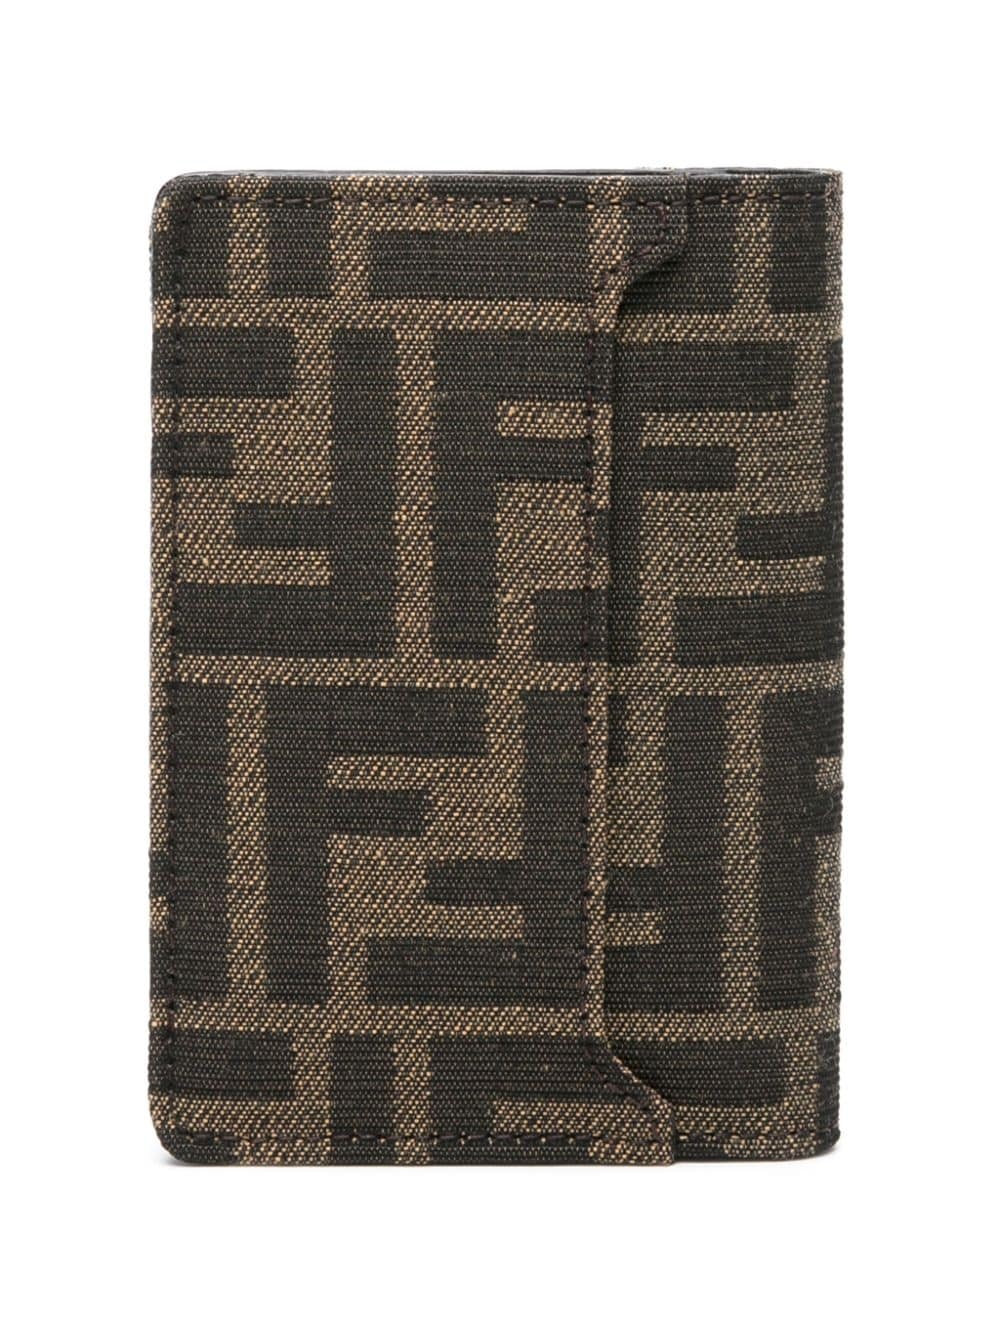 FF-jacquard leather wallet - 2